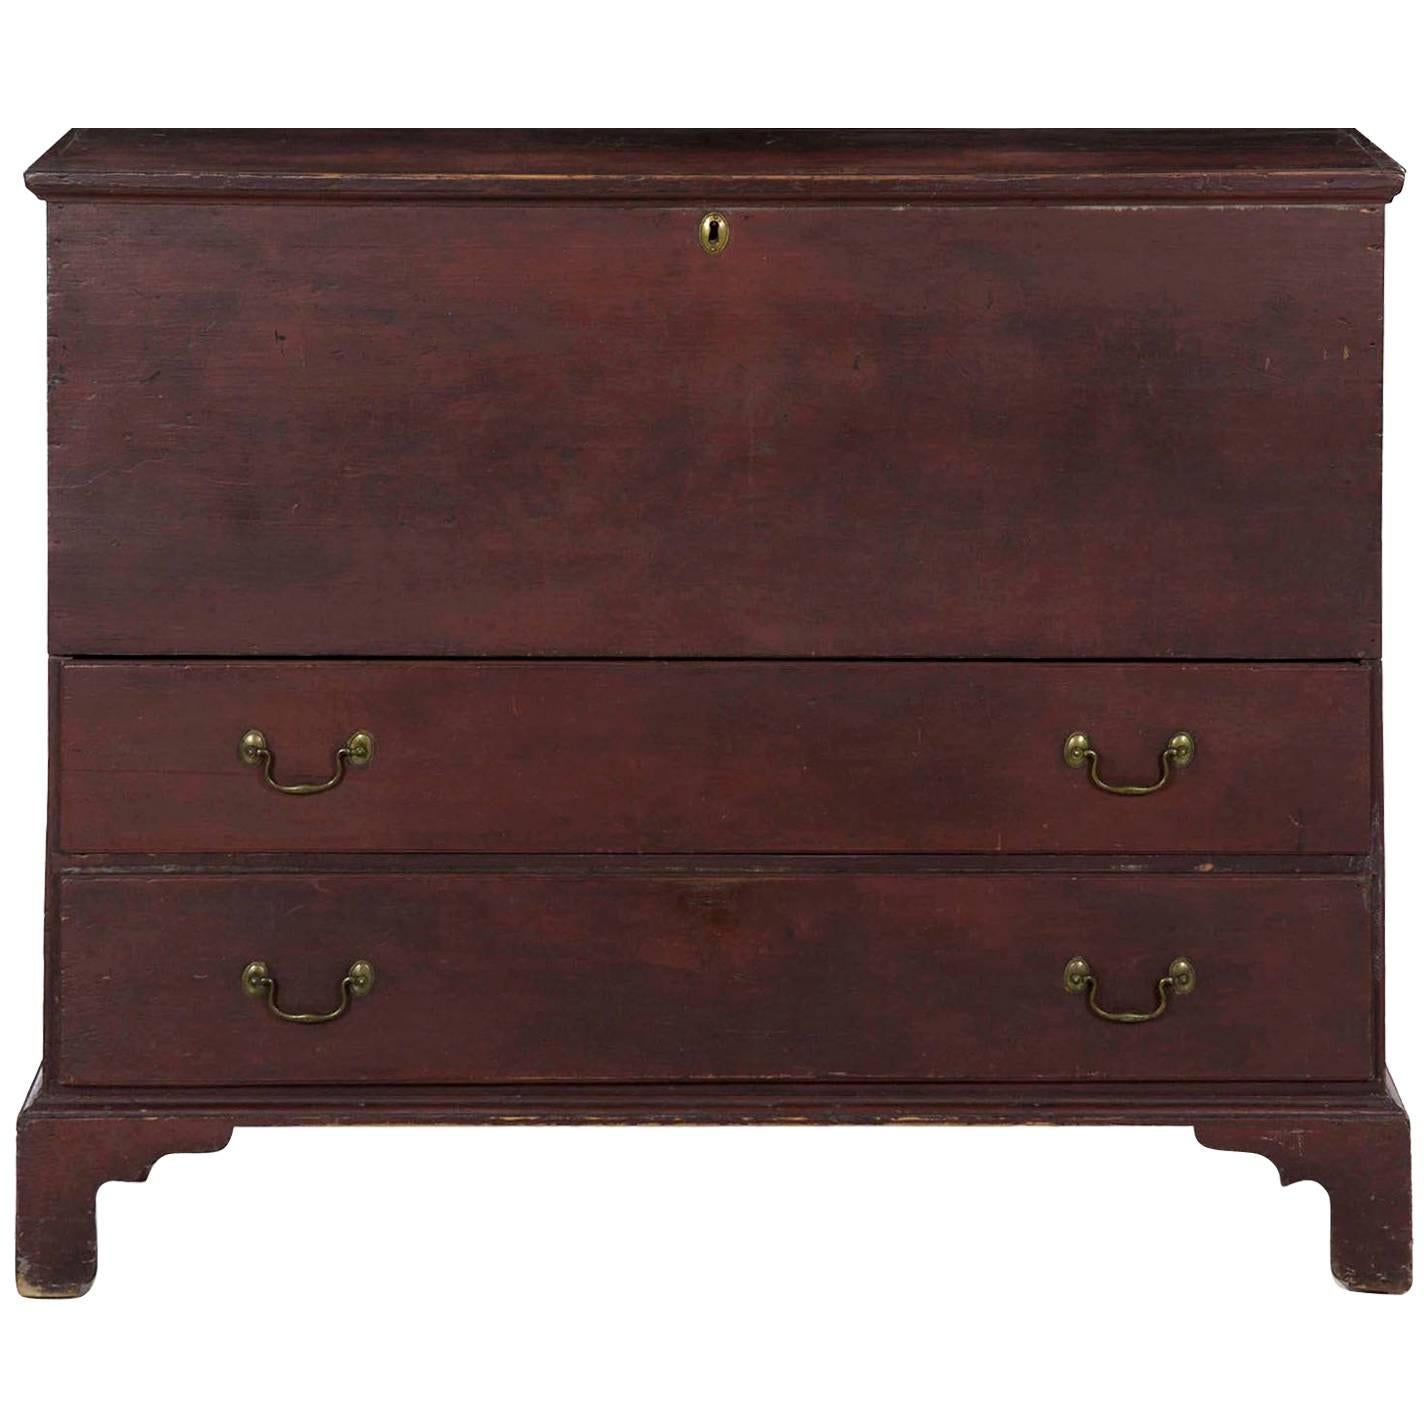 19th Century American Red Painted Mule Blanket Chest of Drawers